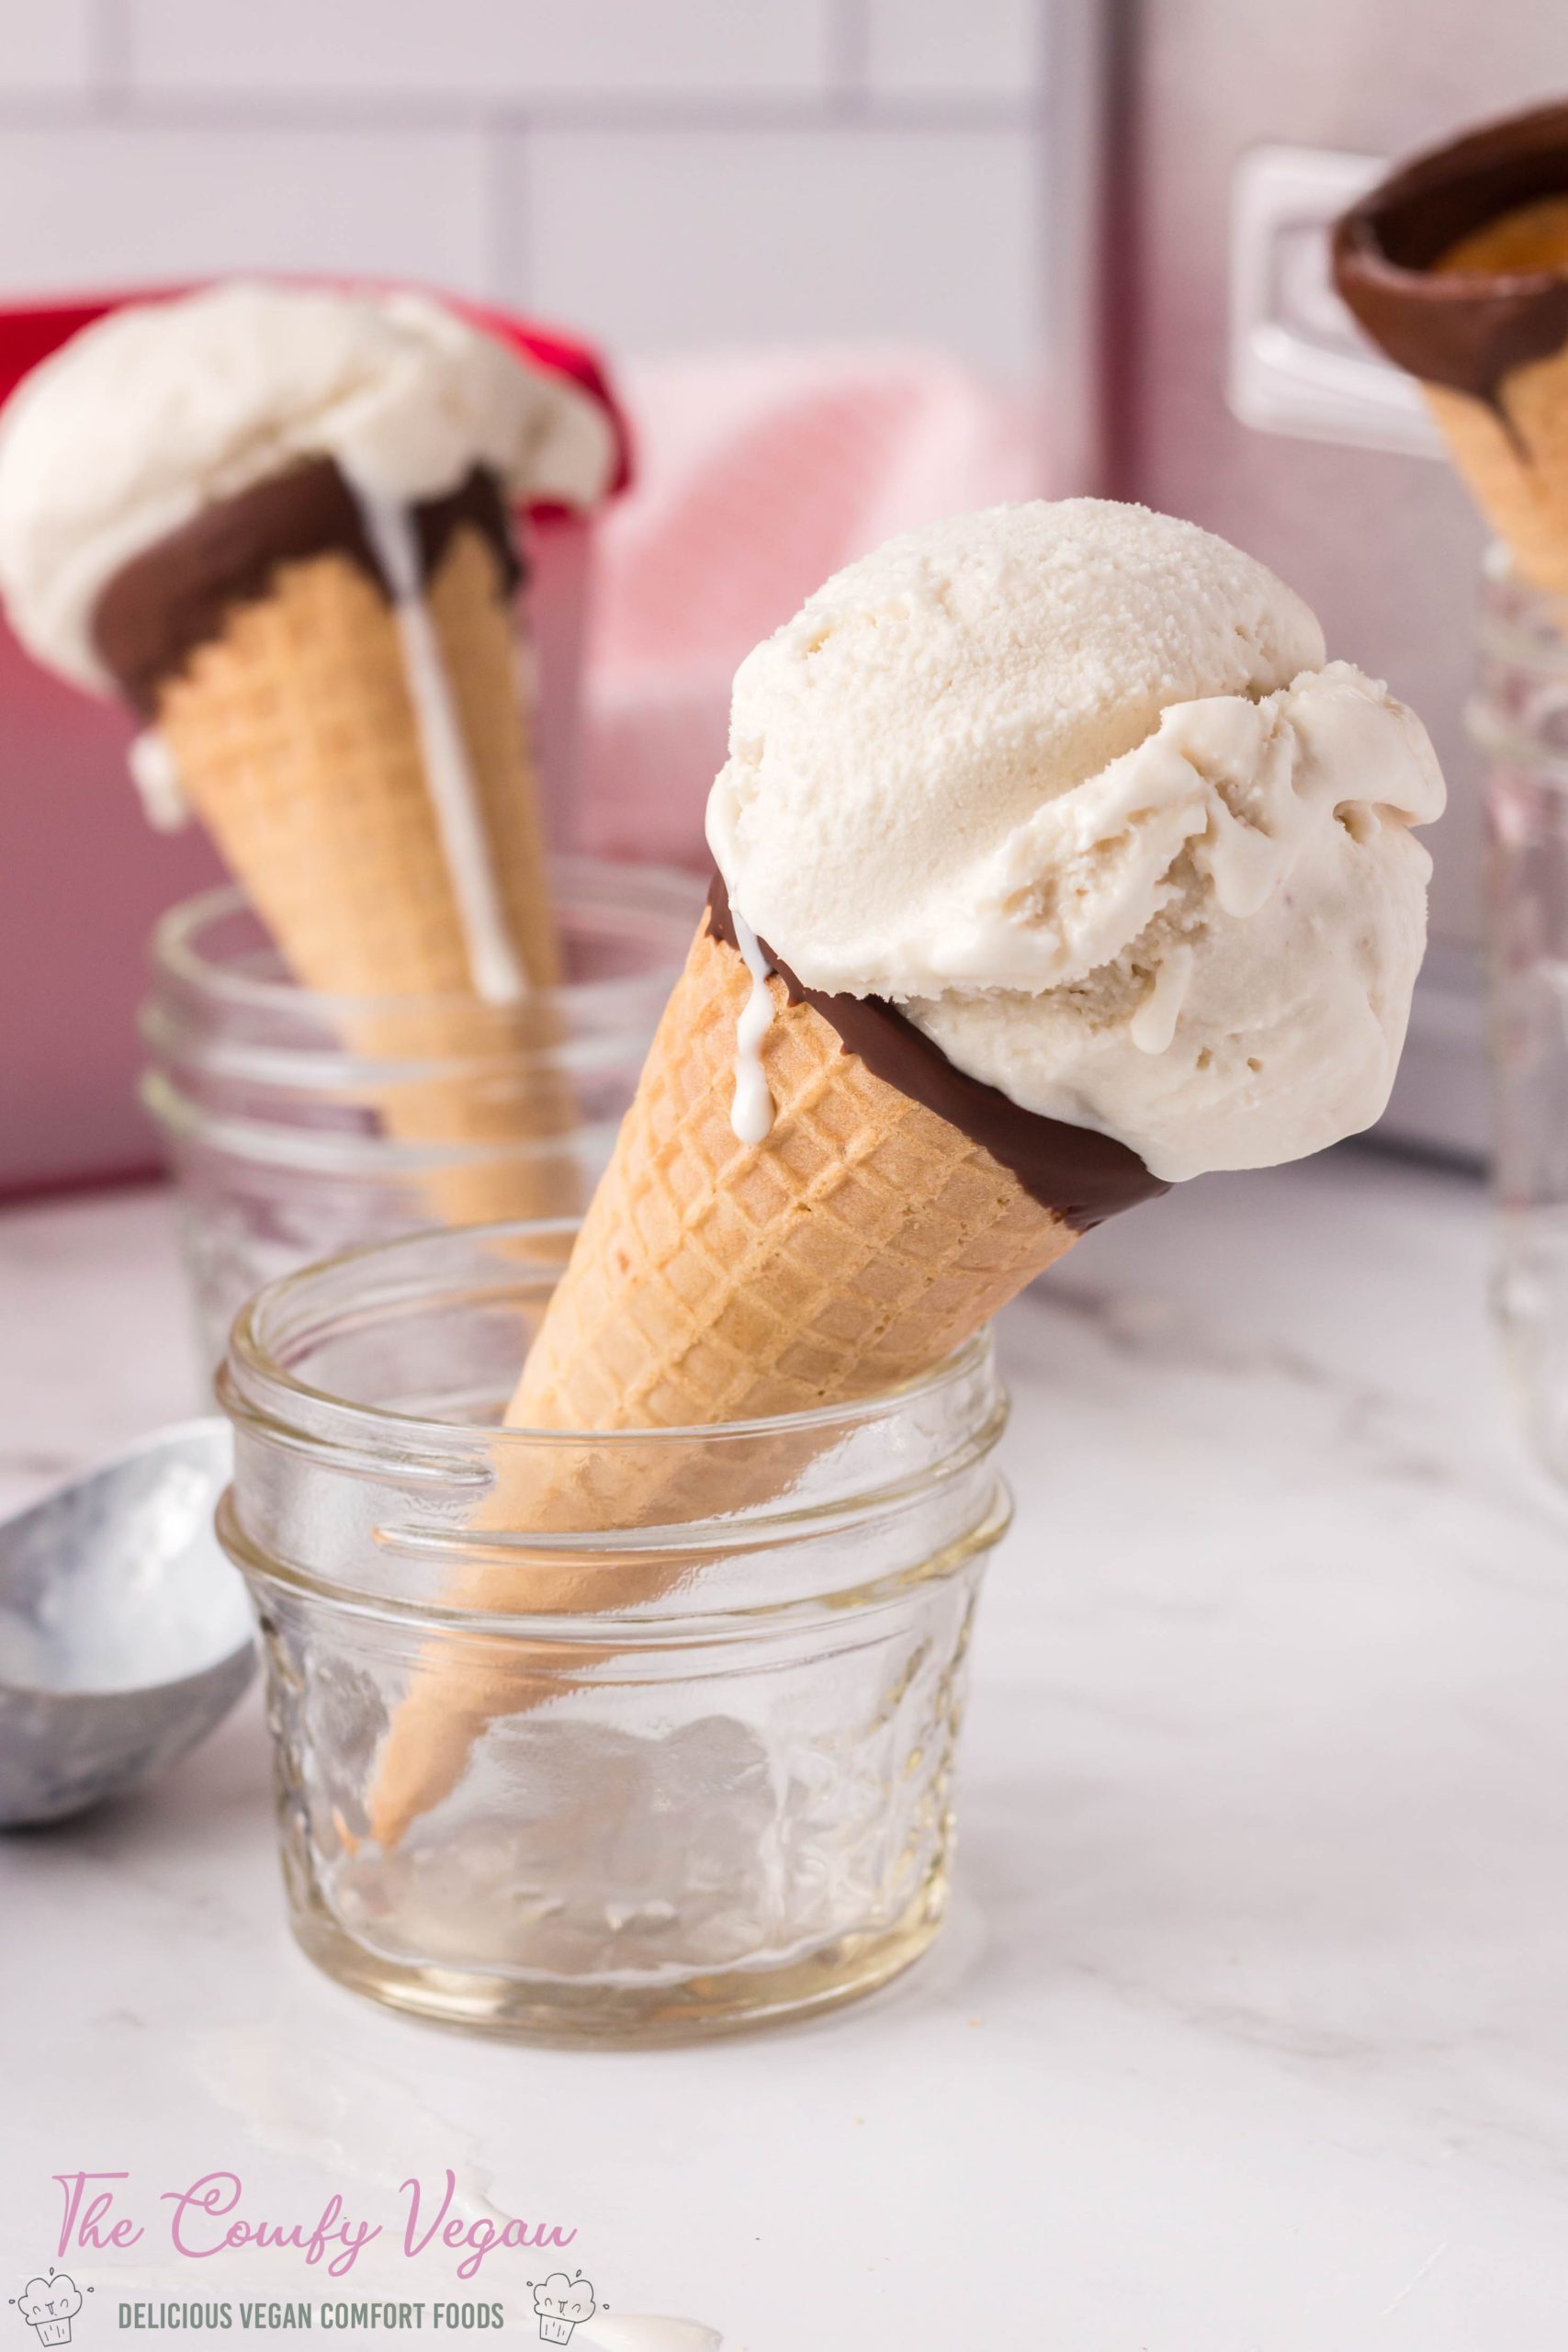 The easiest Vegan Vanilla Ice Cream recipe ever! Made with or without an ice cream maker this vegan ice cream recipe uses just 3 ingredients. It's creamy, just sweet enough, and will save you tons of money at the store making it at home. Use in a cone, in a bowl, or on top of your favorite dessert, this ice cream recipe is amazing!